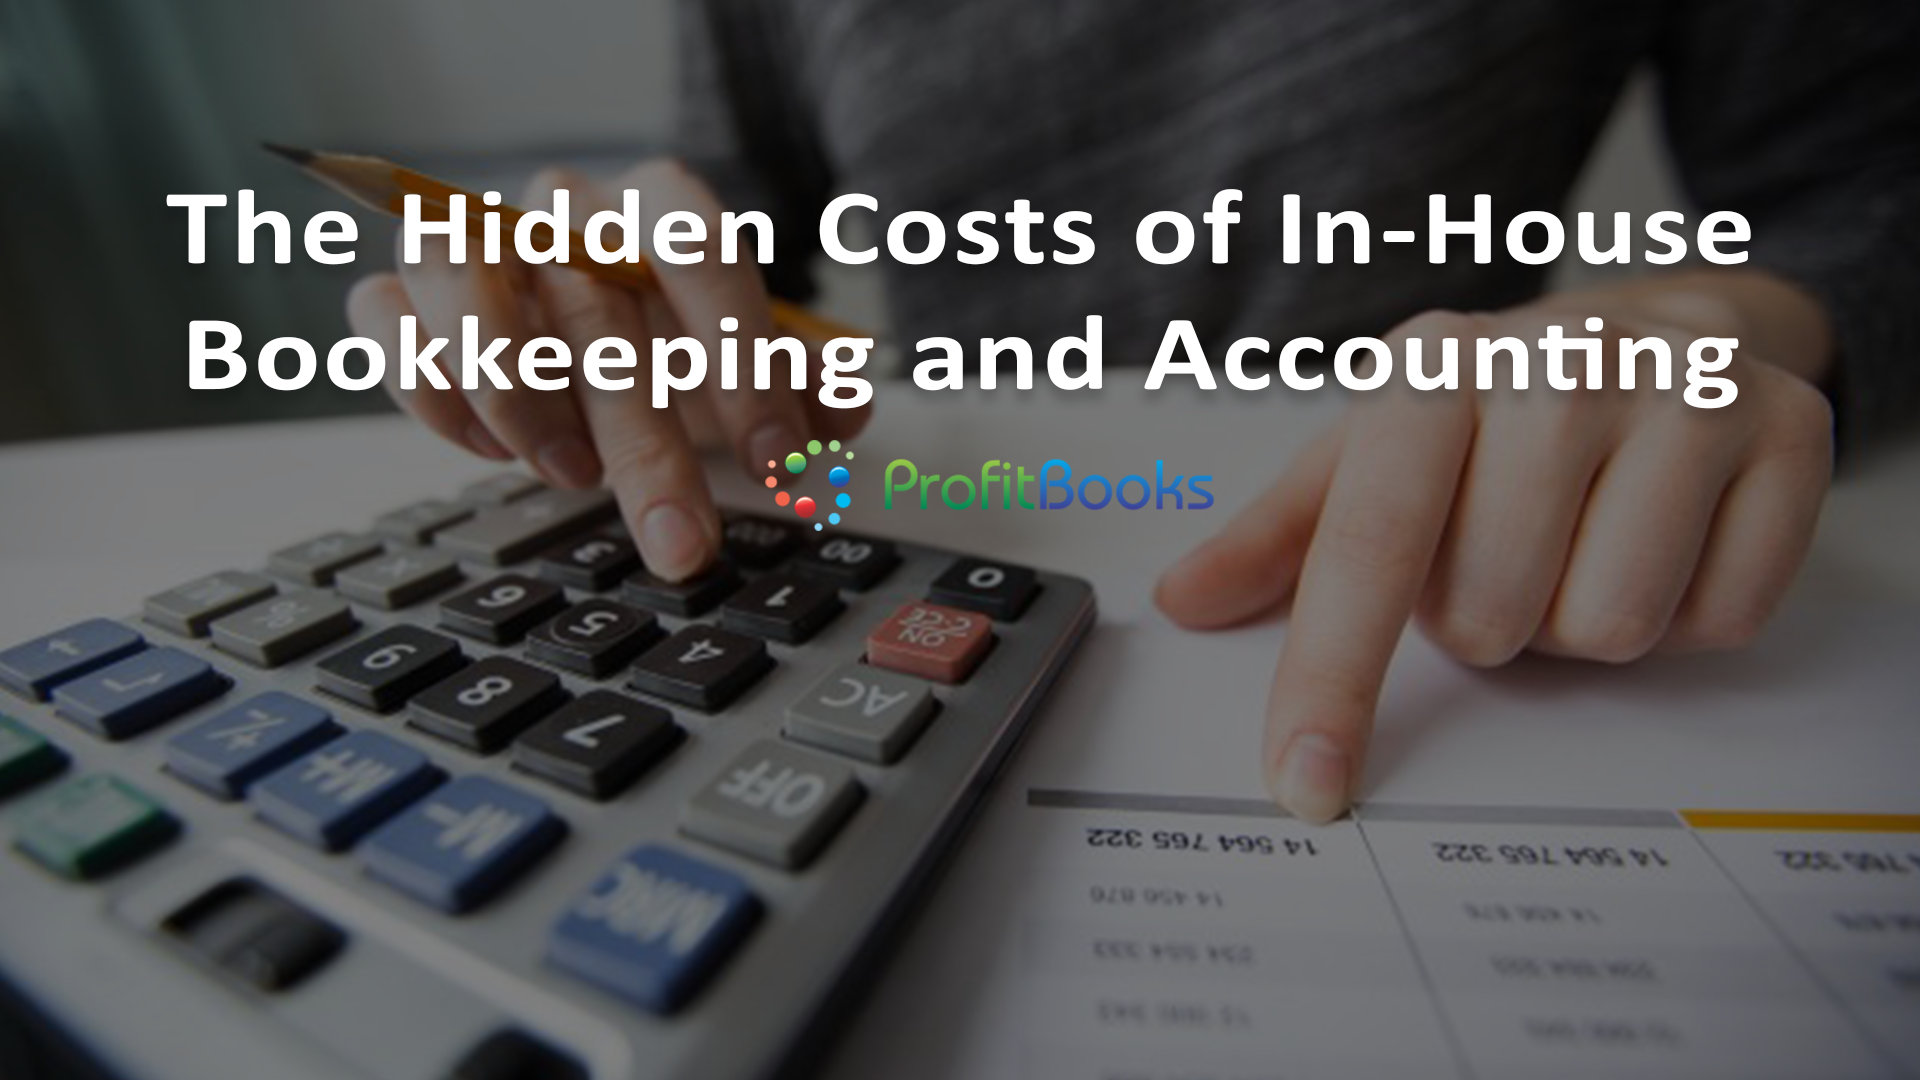 The Hidden Costs of In-House Bookkeeping and Accounting